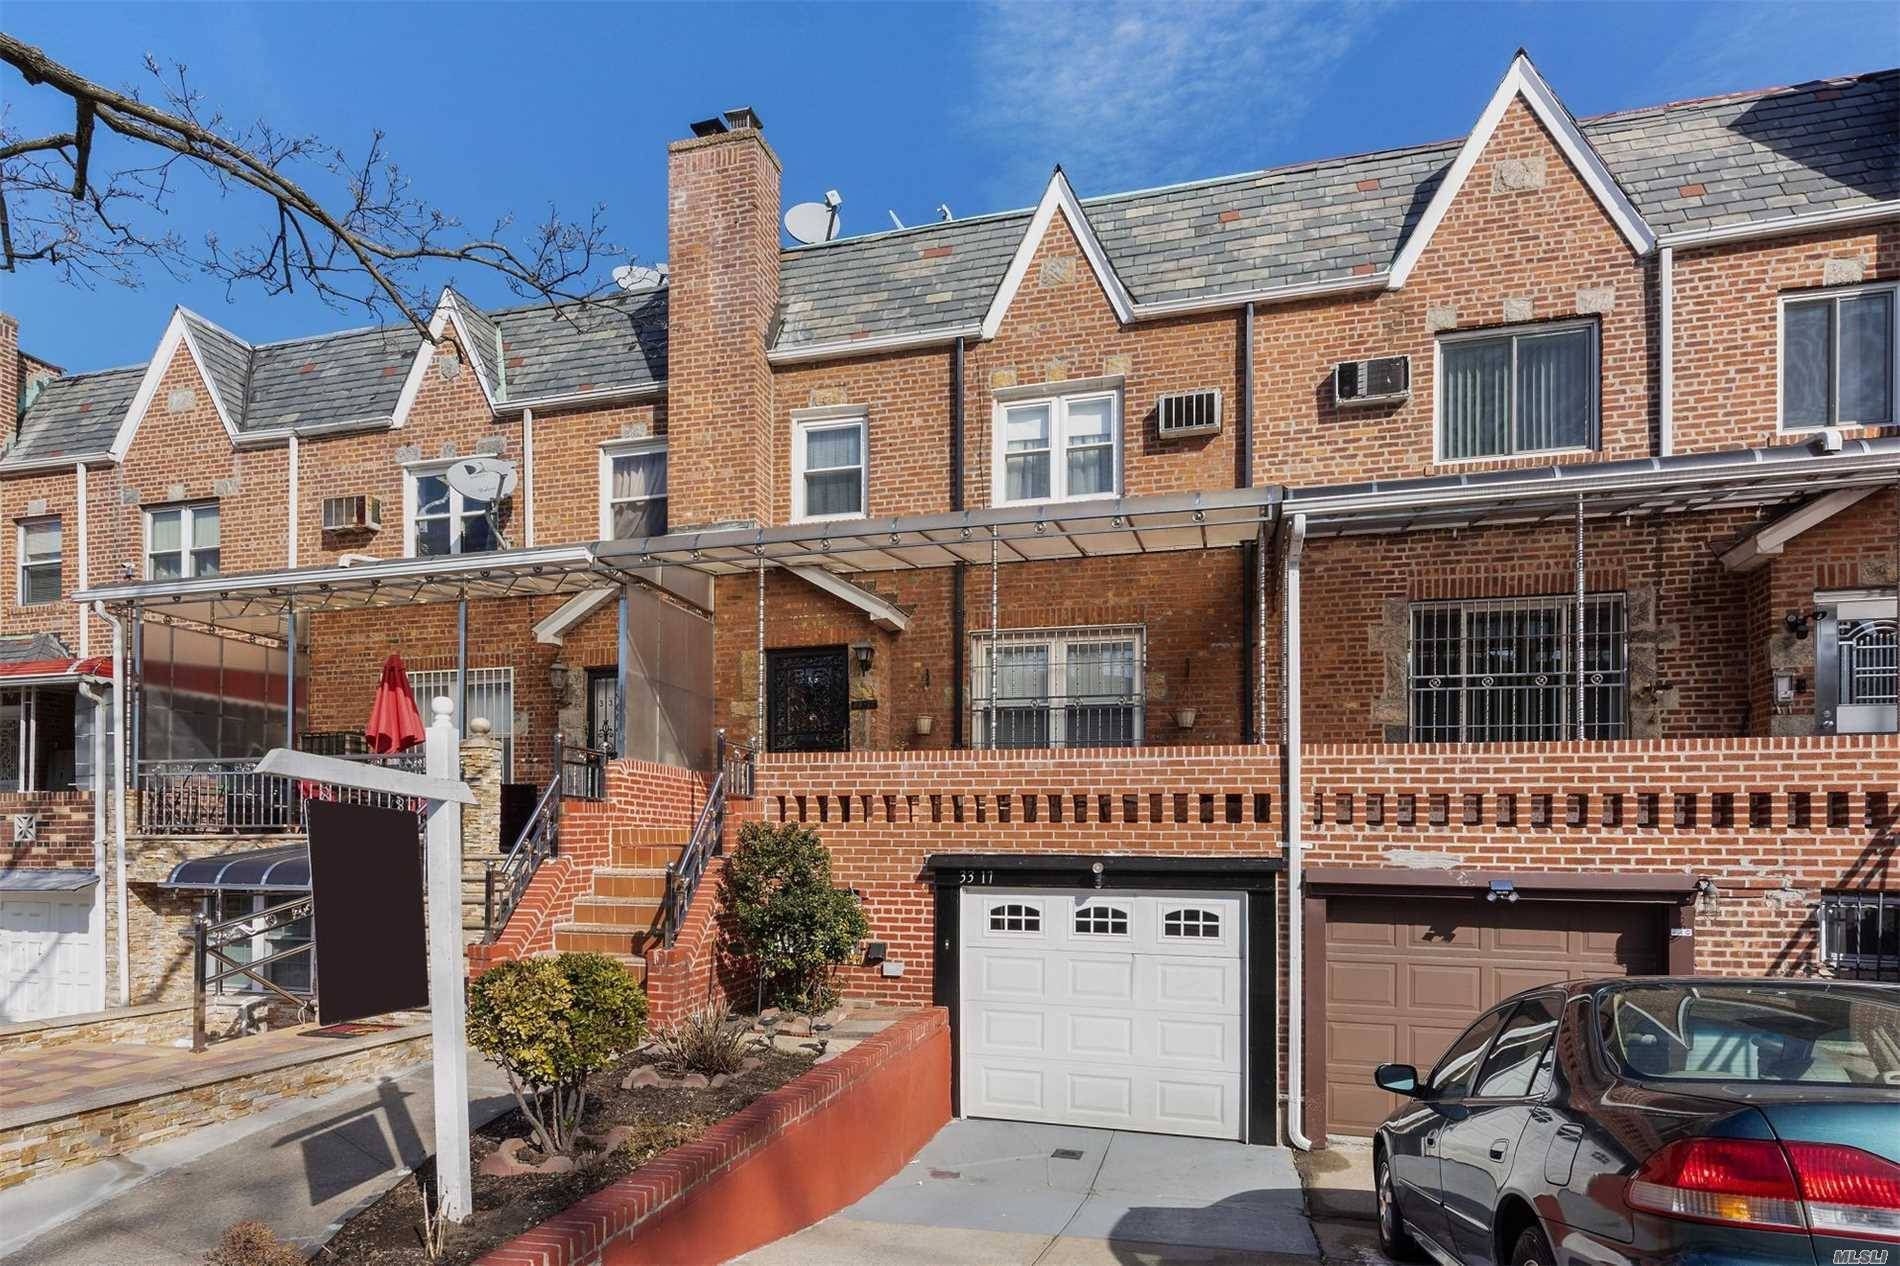 Lovingly maintained and fully renovated single family home in the heart of Jackson Heights.